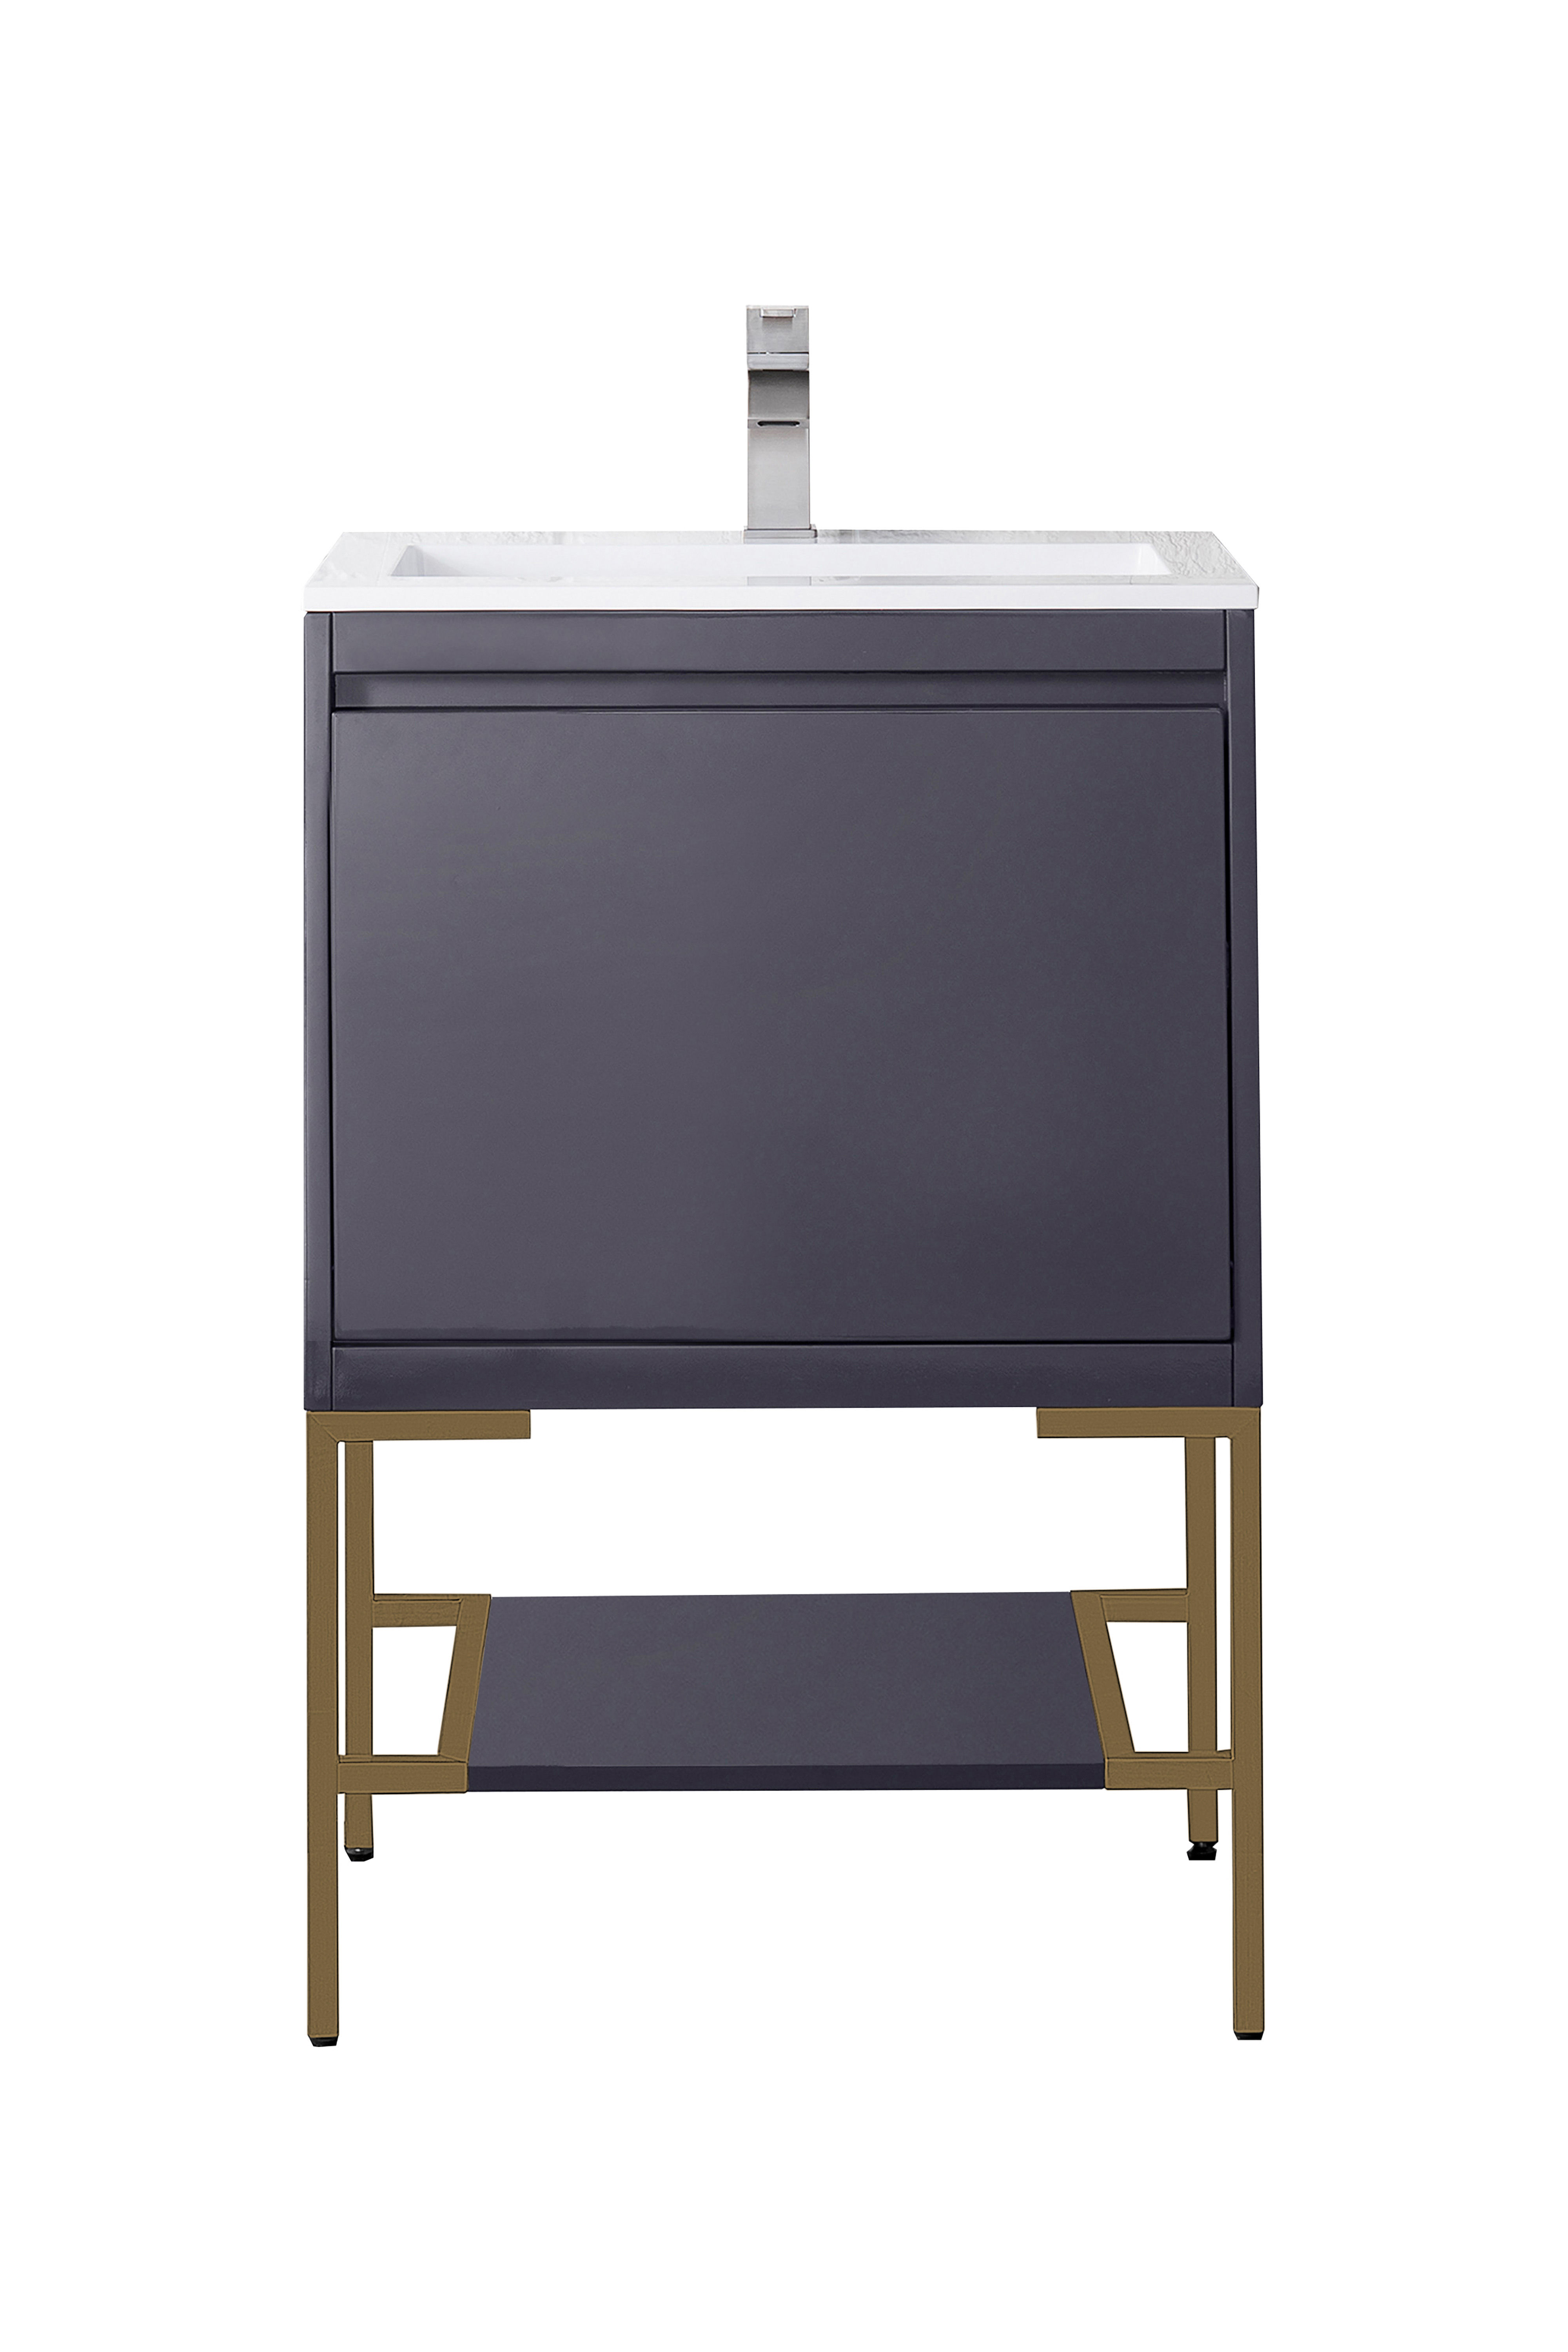 James Martin 801V23.6MGGRGDGW Milan 23.6" Single Vanity Cabinet, Modern Grey Glossy, Radiant Gold w/Glossy White Composite Top